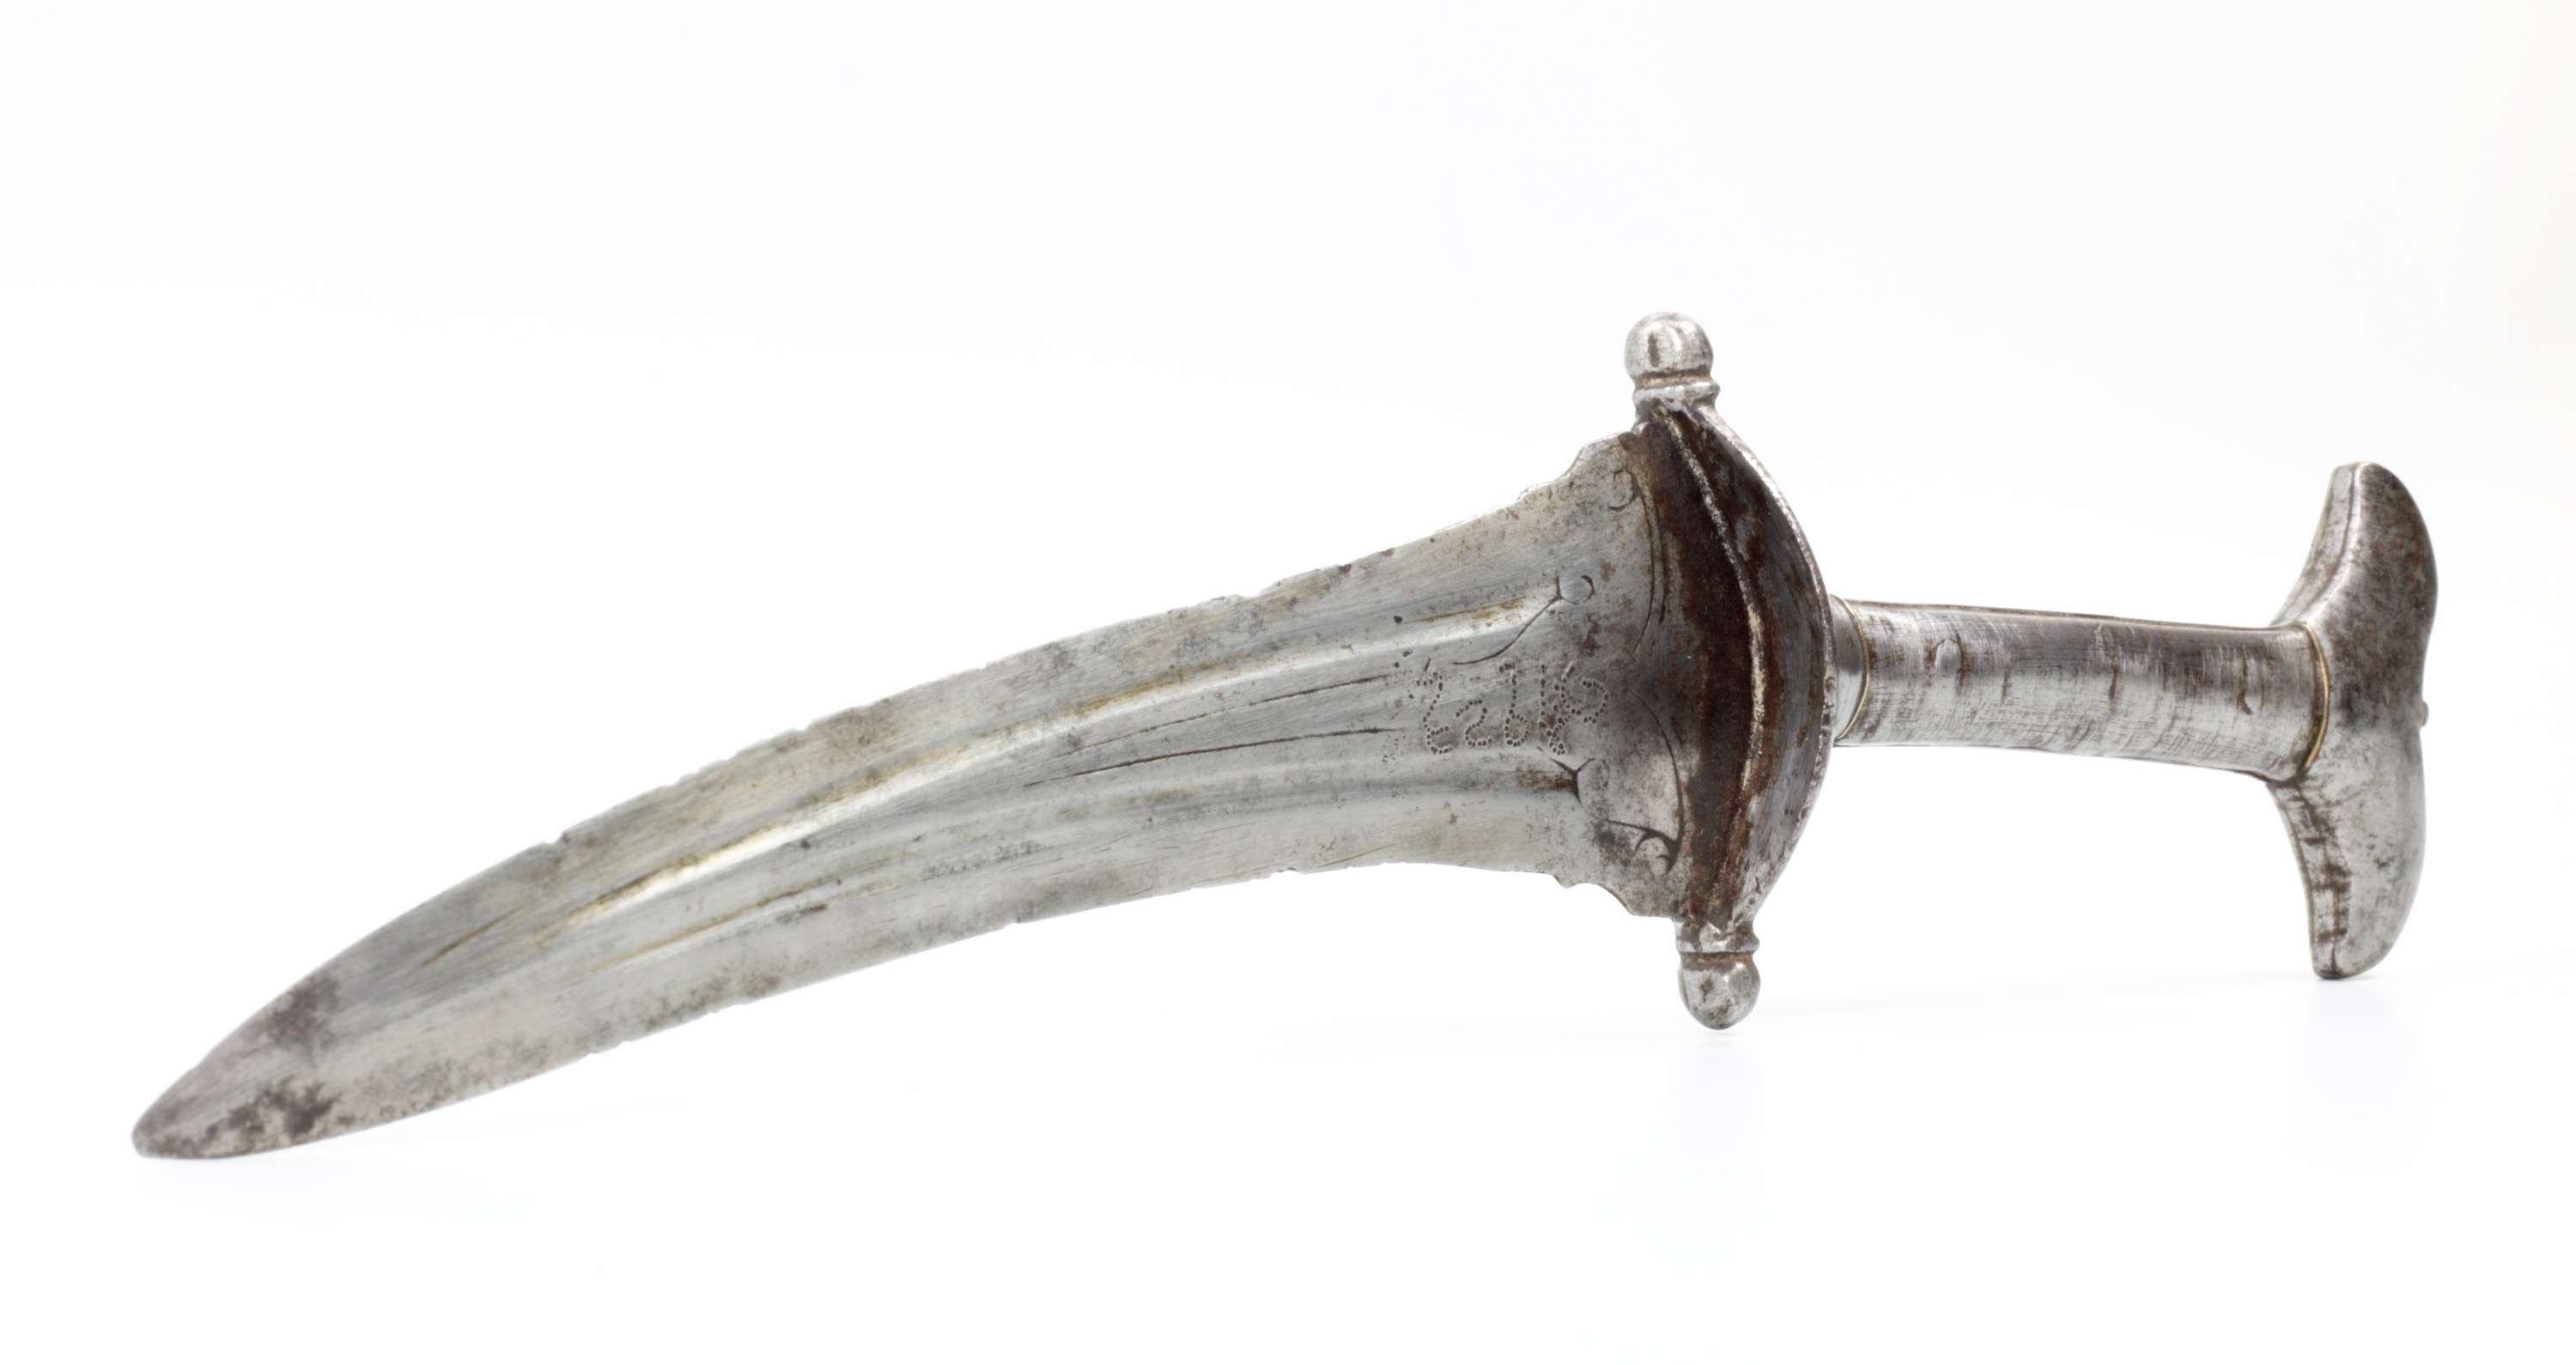 A small dagger from the Bikaner armory